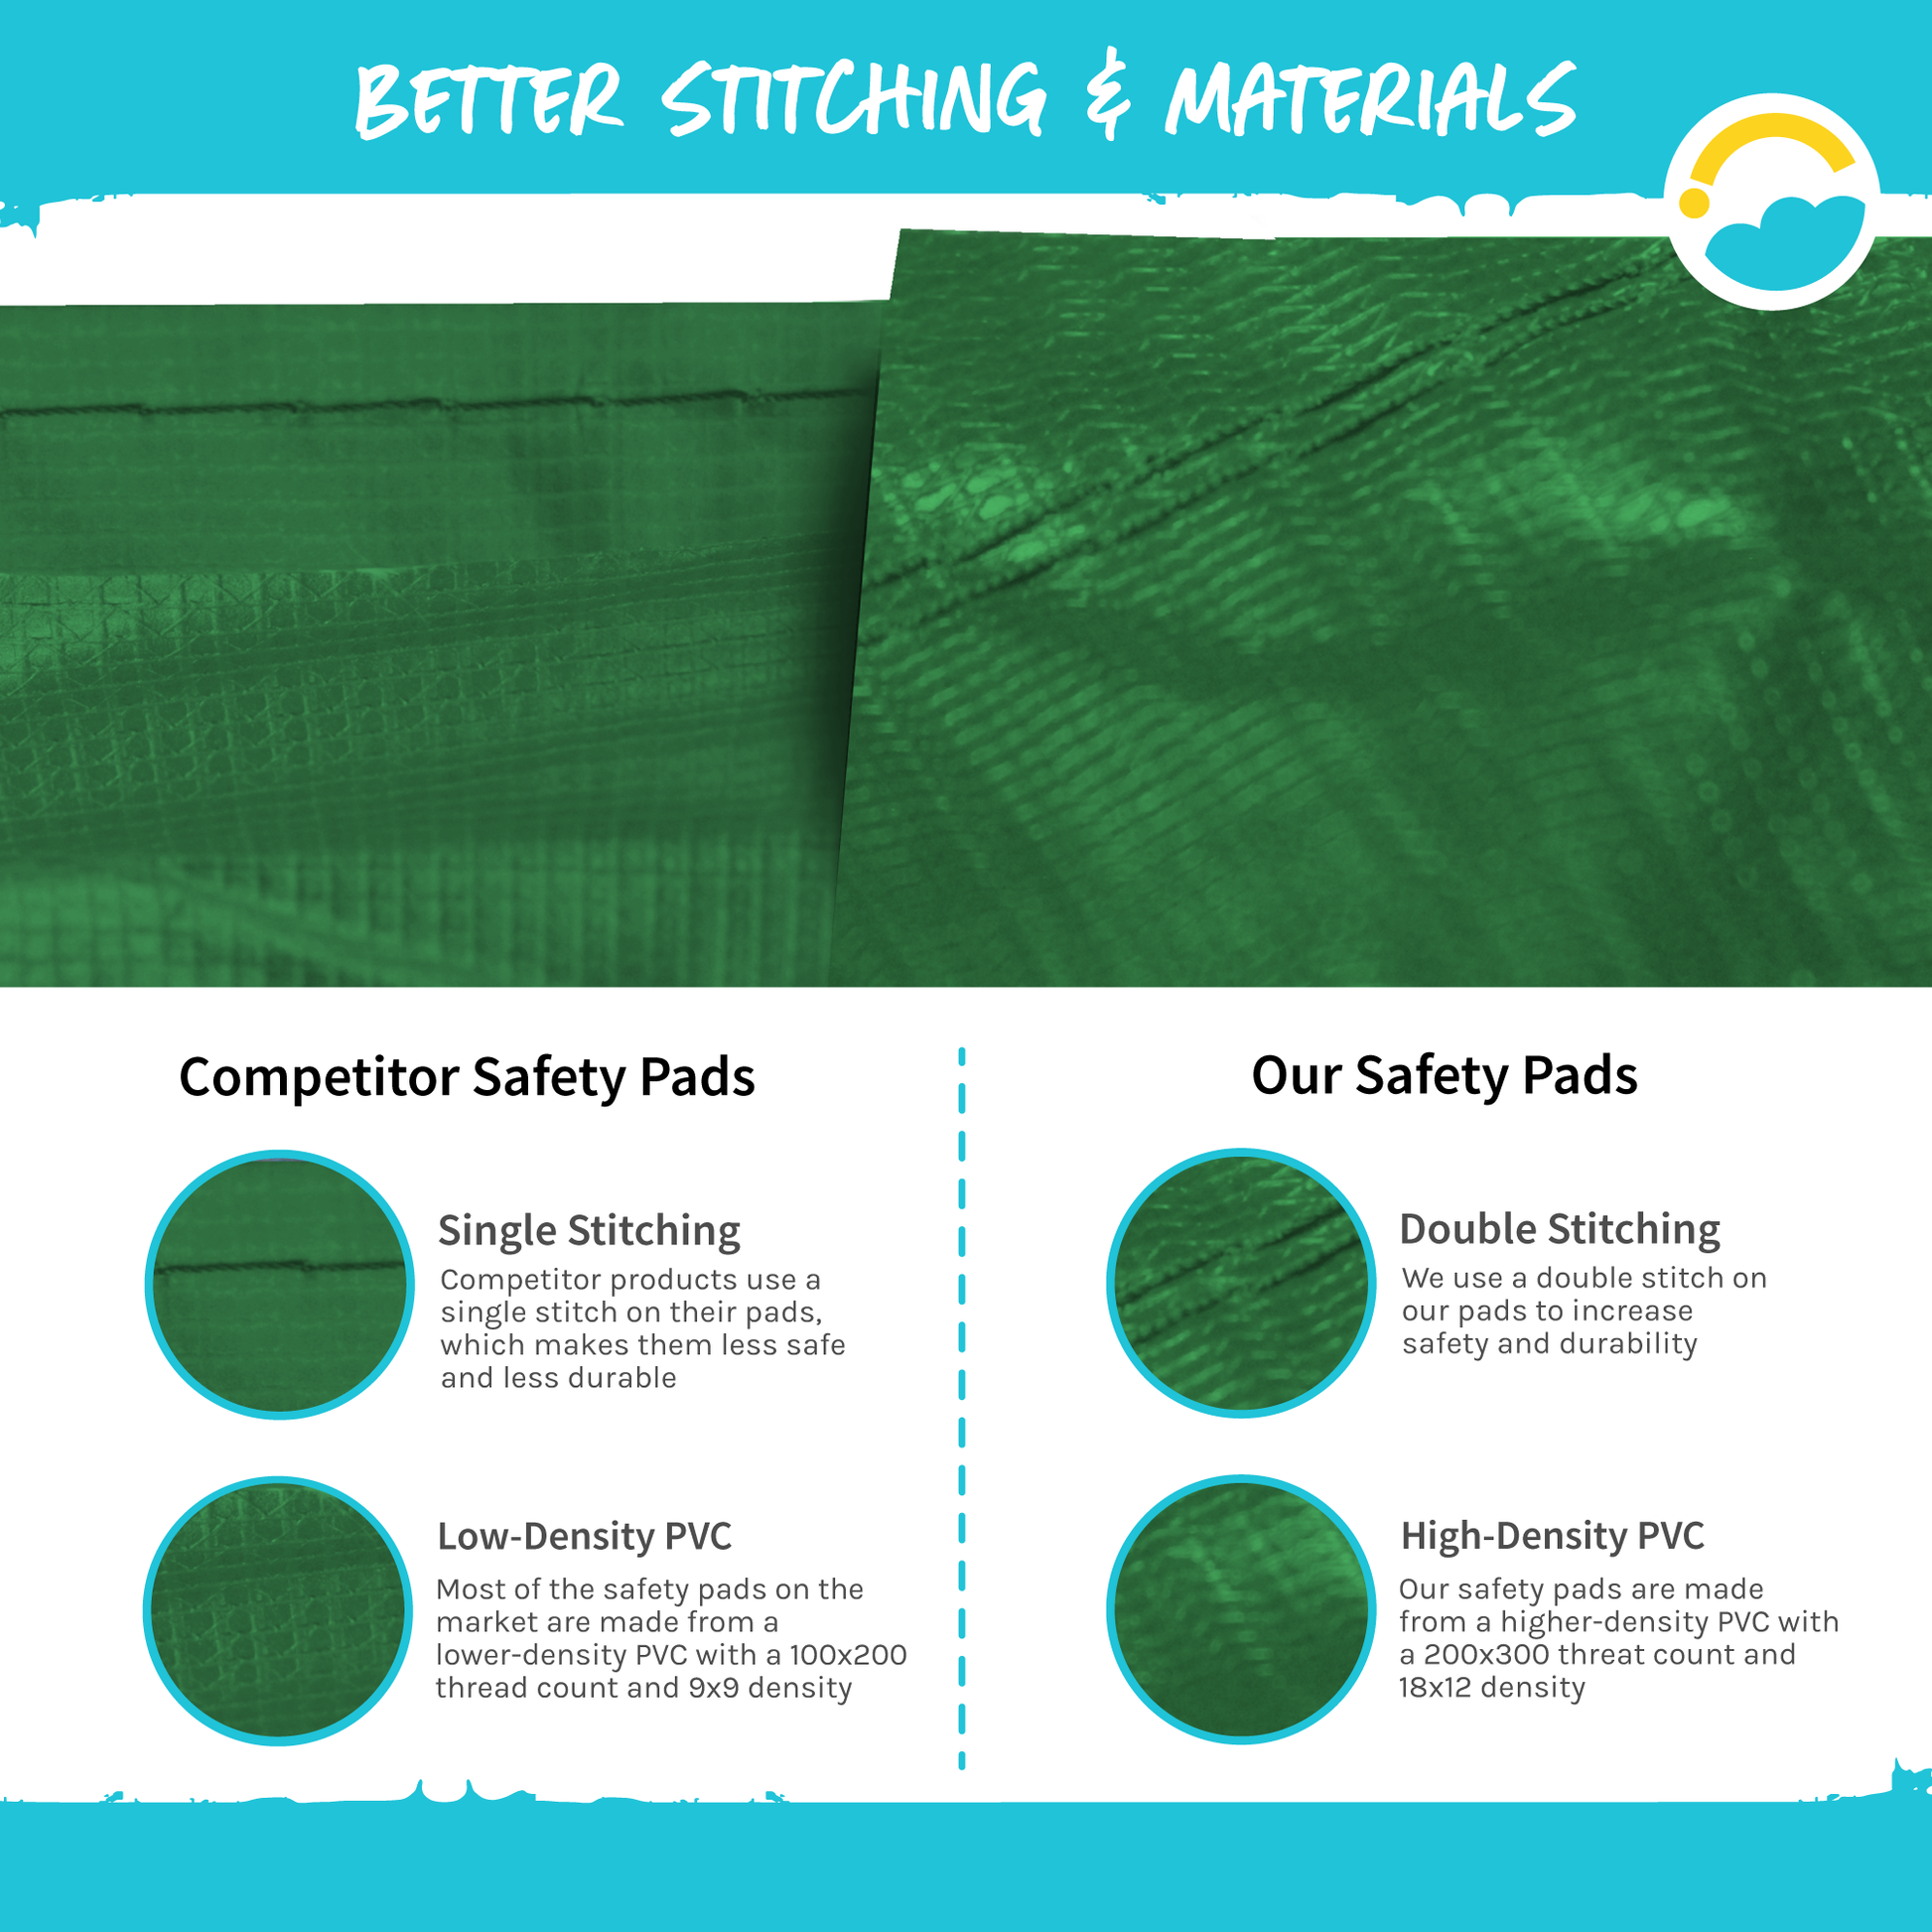 A comparison between Competitor Safety Pad and SkyBound USA safety pad. Competitor pad: Single Stitching and Low-Density PVC (100x200 thread count and 9x9 density). SkyBound USA Safety Pads: Double Stitching and High-Density PVC (200x300 threat count and 18x12 density)